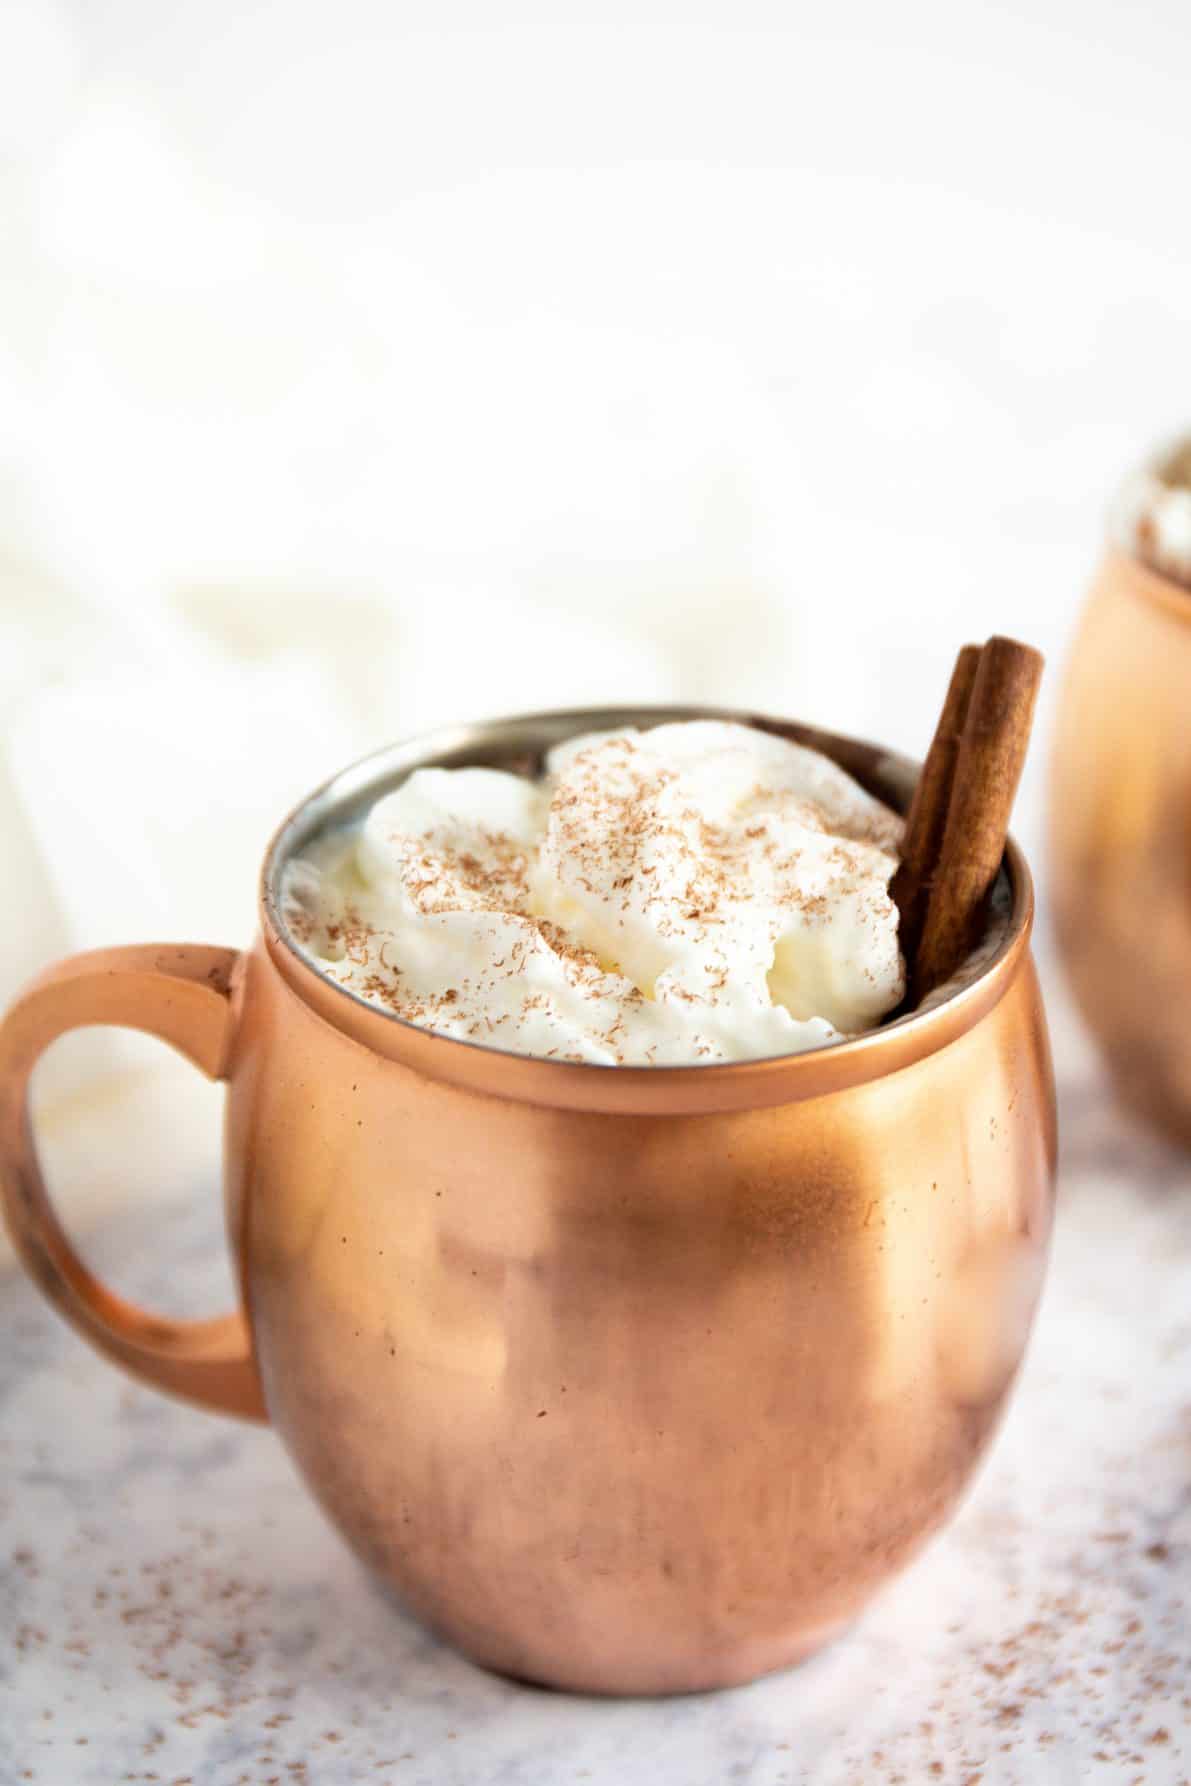 A copper mug filled with Mexican hot chocolate.